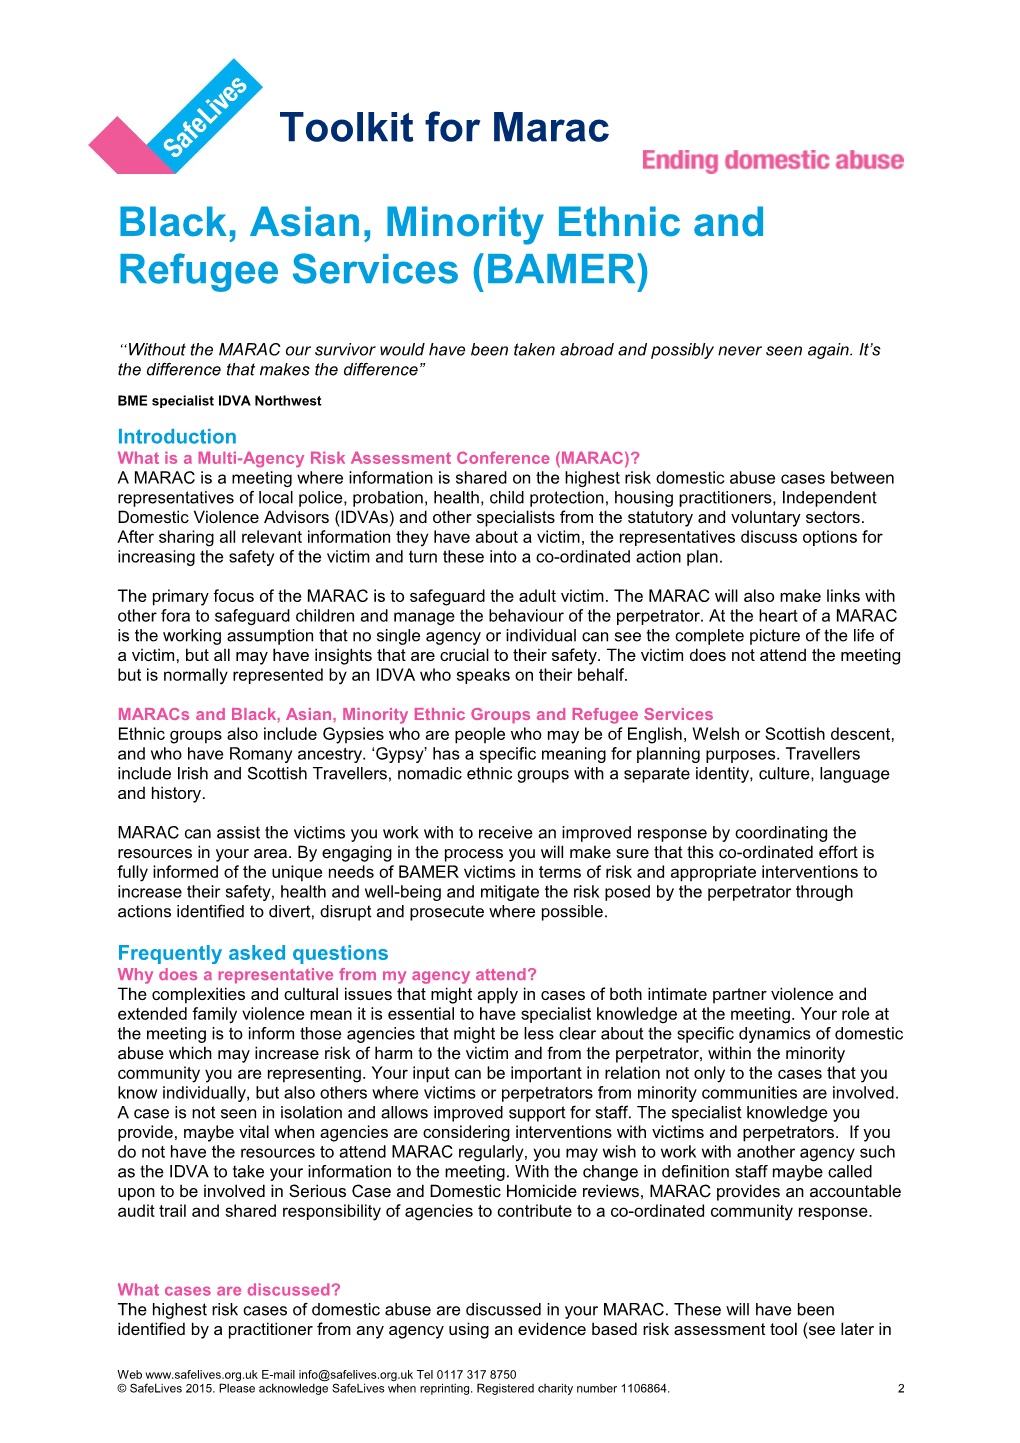 Black, Asian, Minority Ethnic and Refugee Services (BAMER)